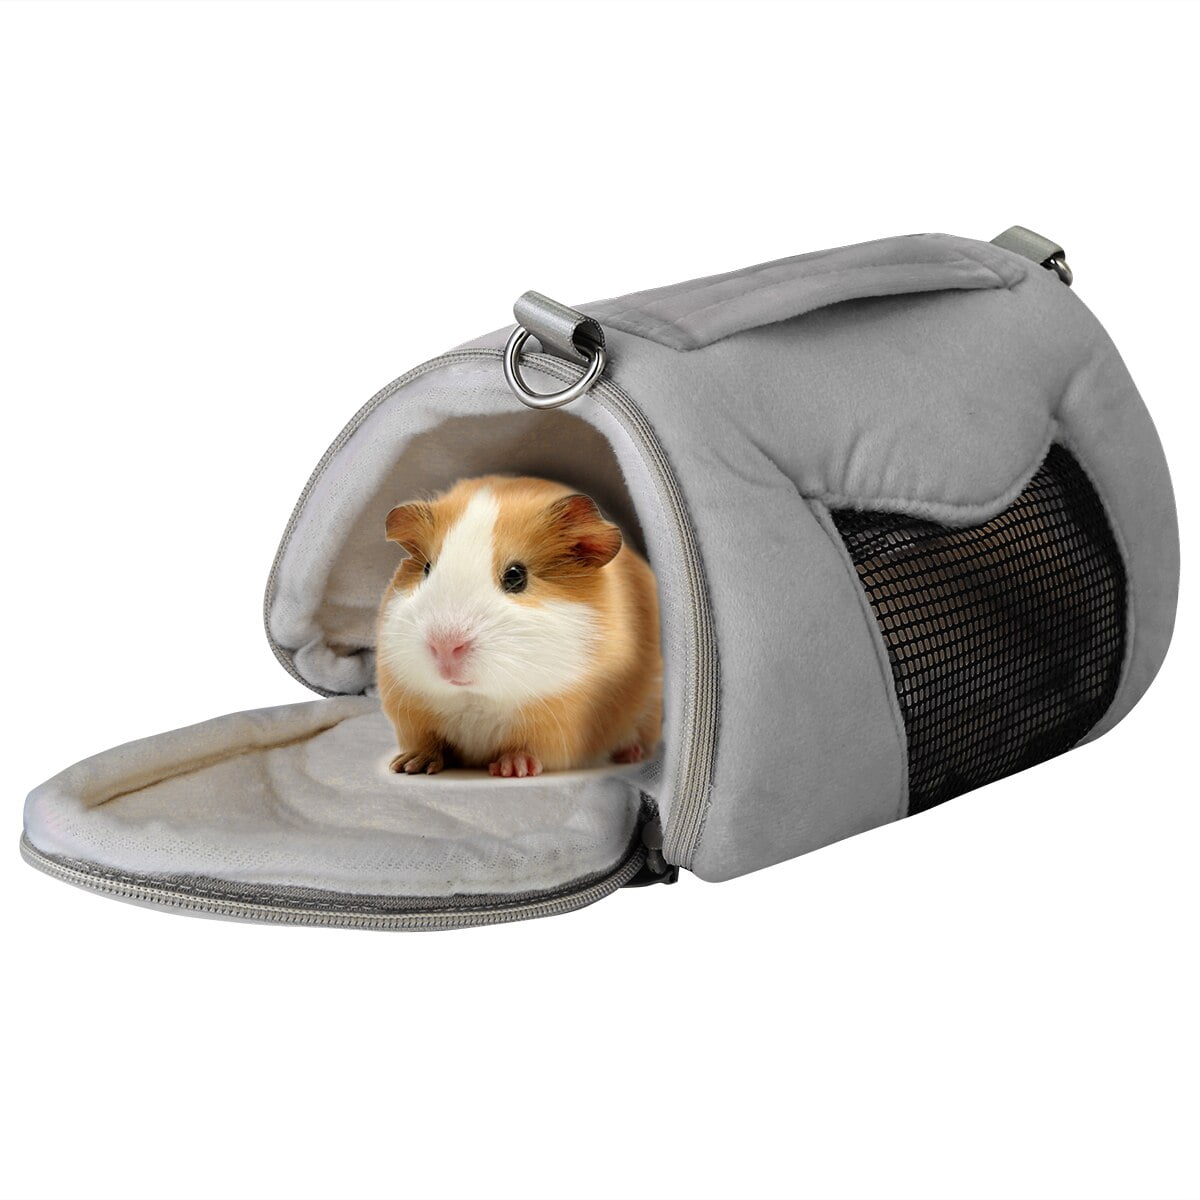 Portable Small Pet Hamster Carrying Bag Winter Warm...